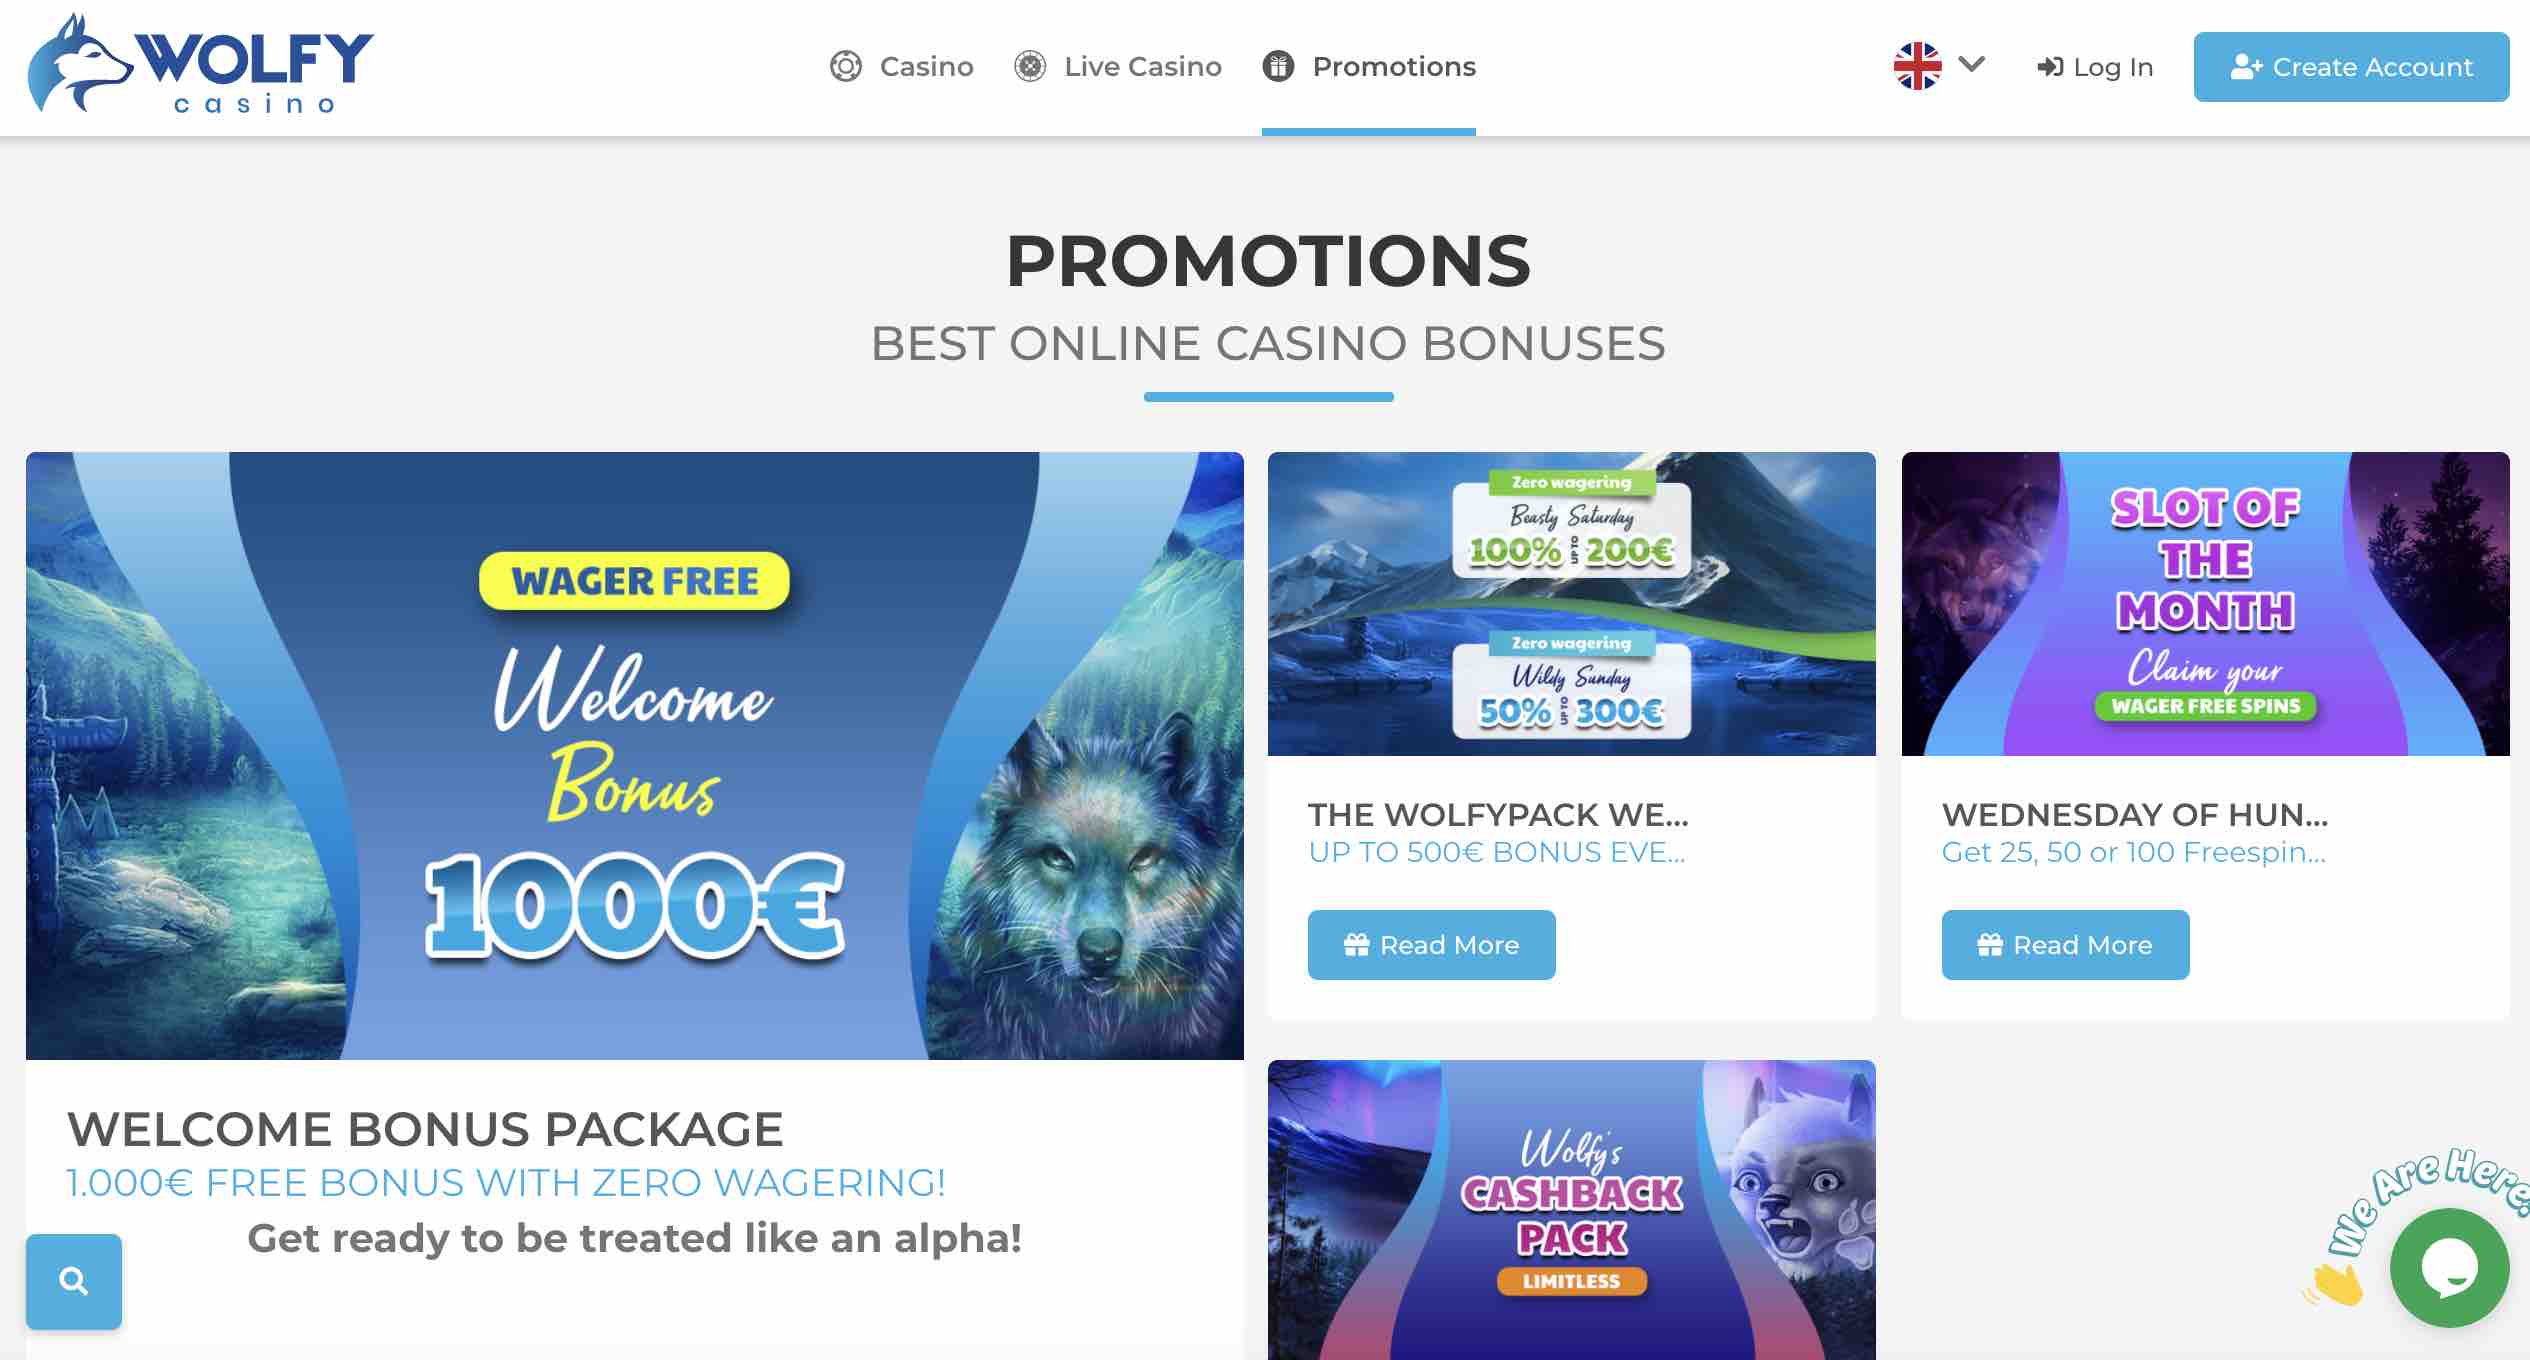 Promotions and Bonuses at Wolfy Casino